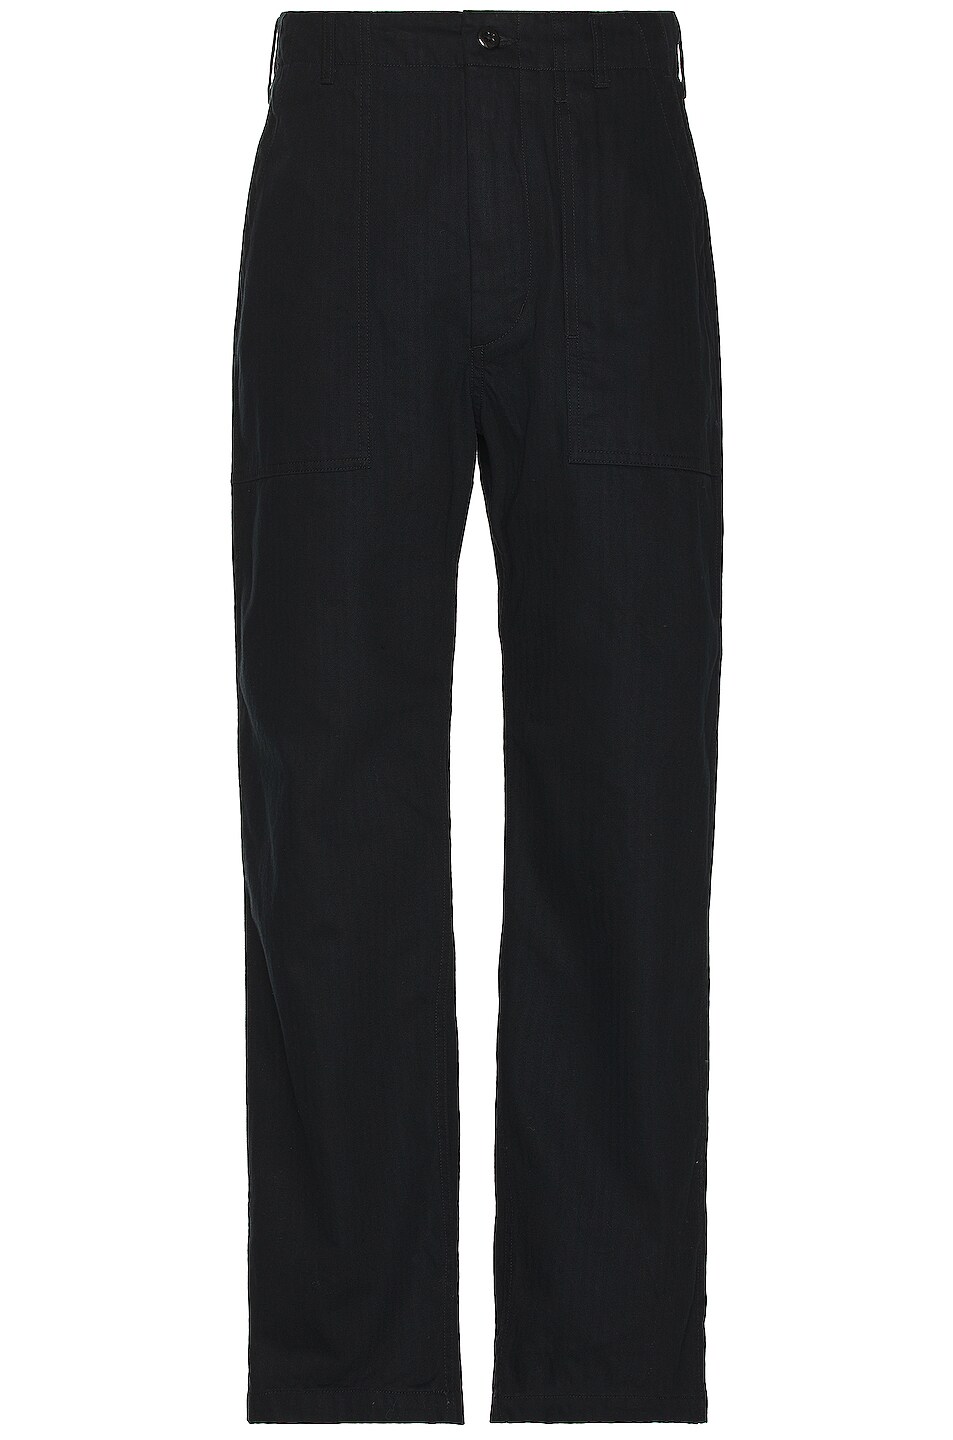 Image 1 of Engineered Garments Fatigue Pant in Black